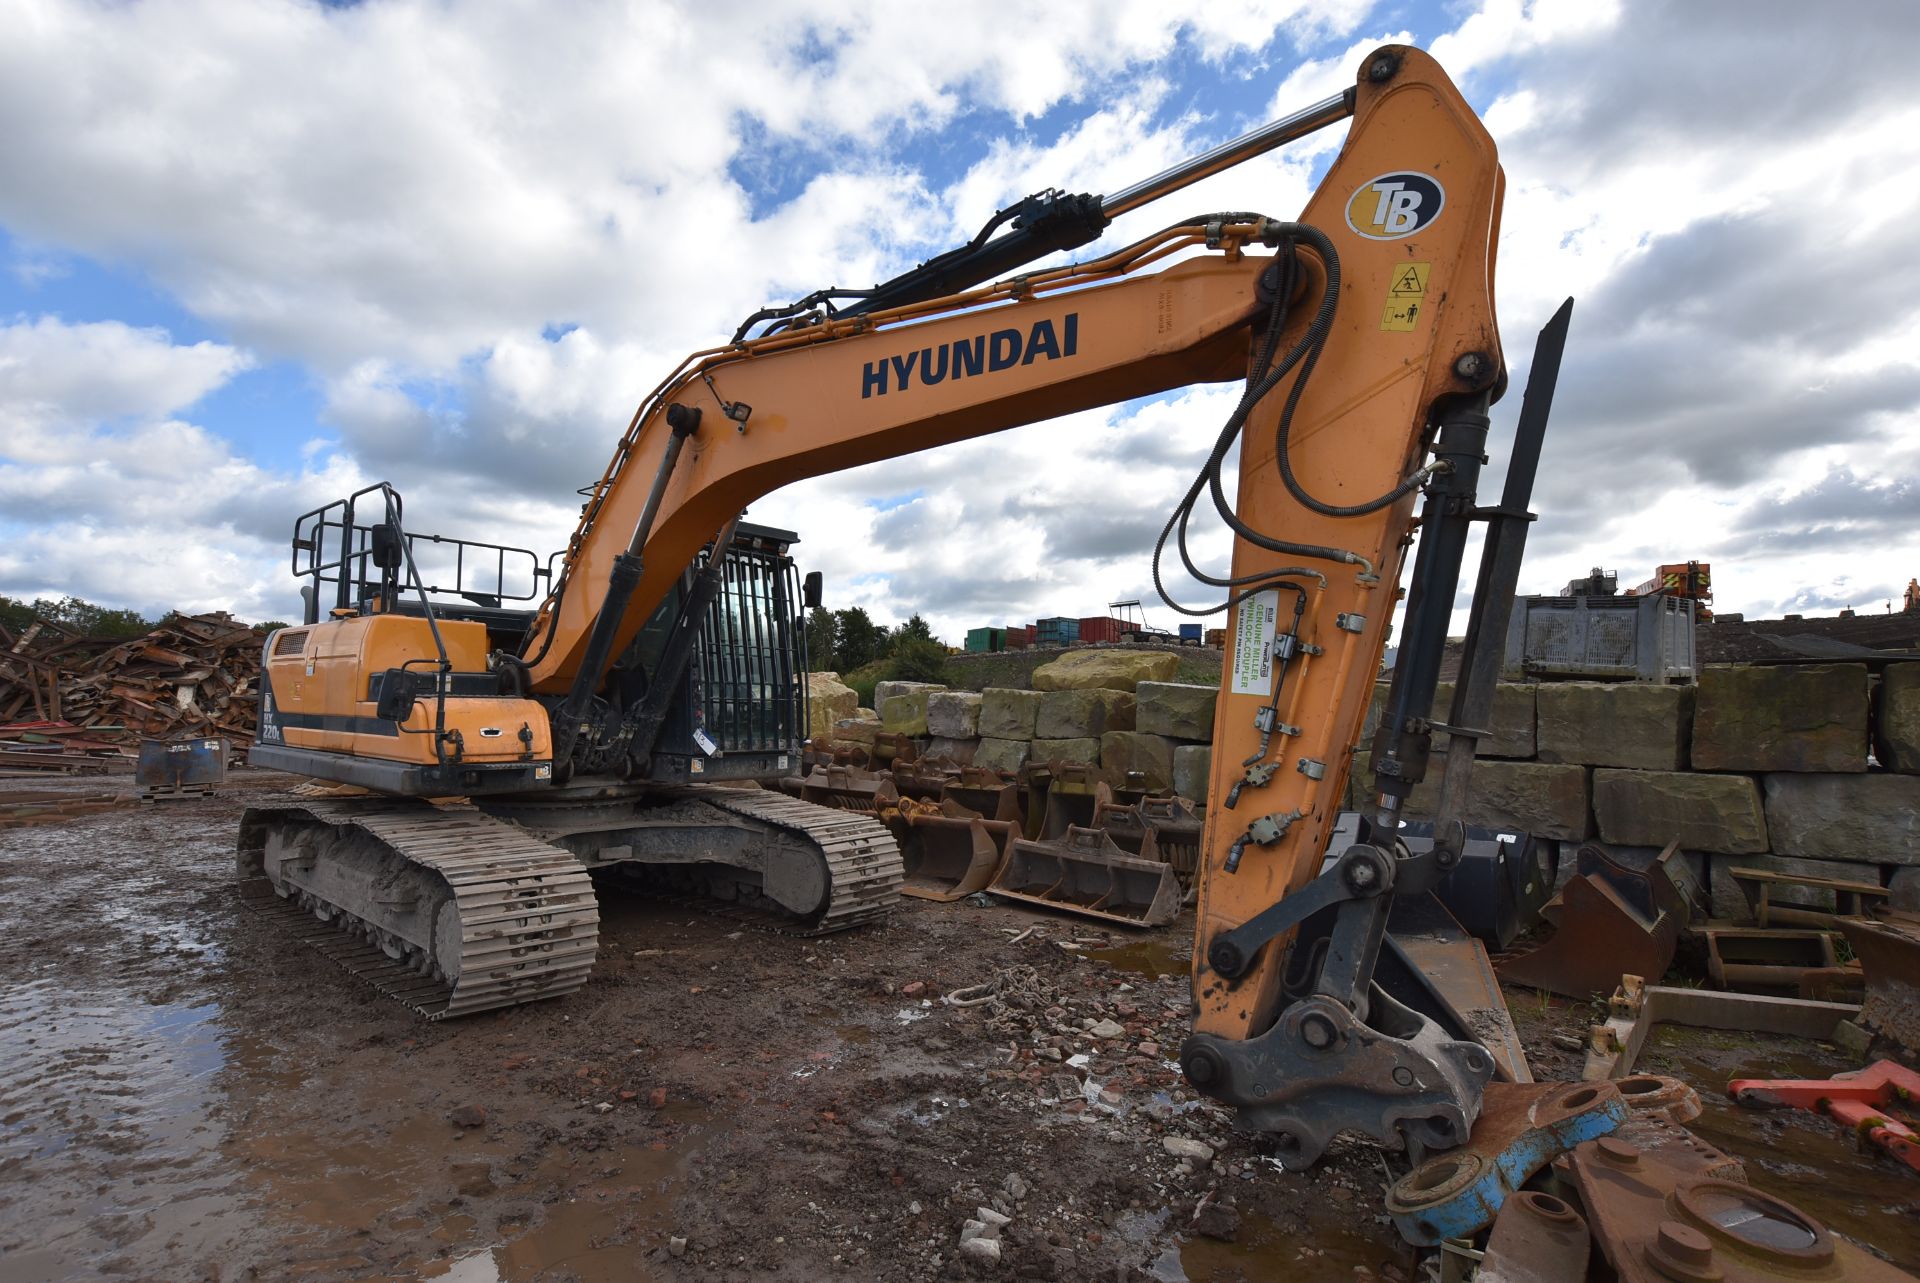 Hyundai HX220L TRACKED EXCAVATOR, serial no. 993, year of manufacture 2018, indicated hours 1885 (at